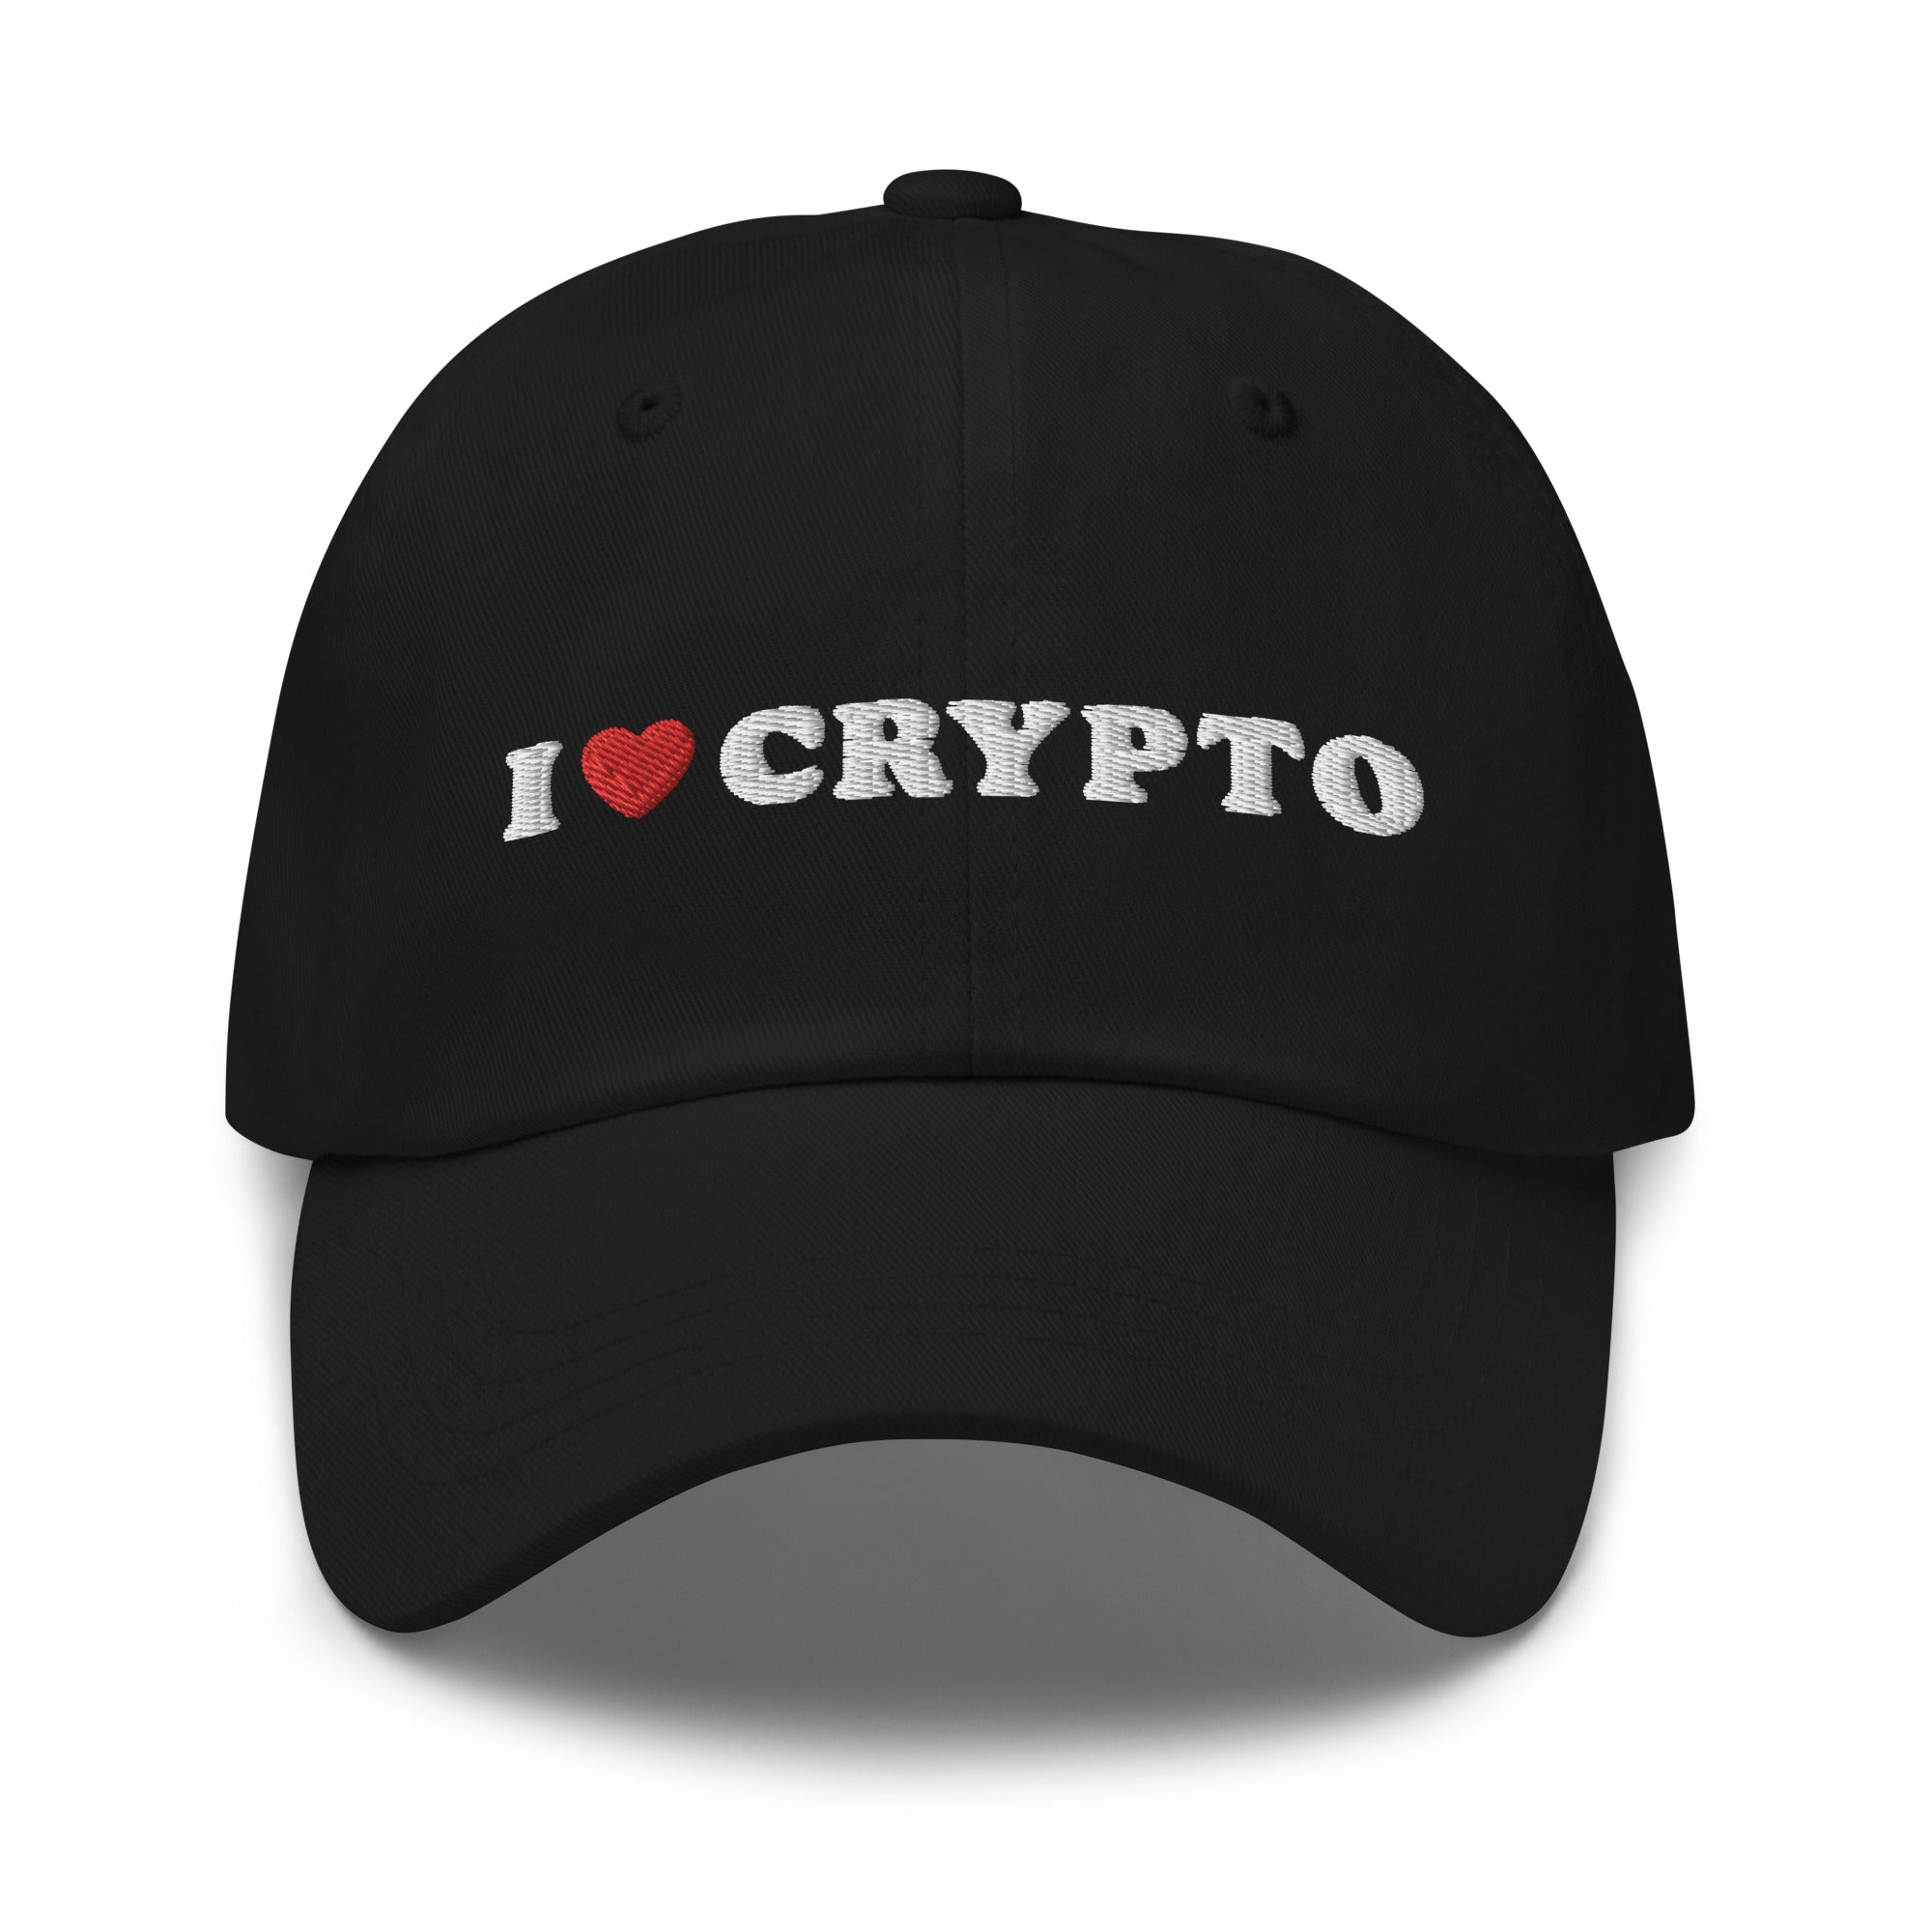 Crypto Cap - The I Love Crypto Hat features a bold embroidered design on a black cap. Front View.